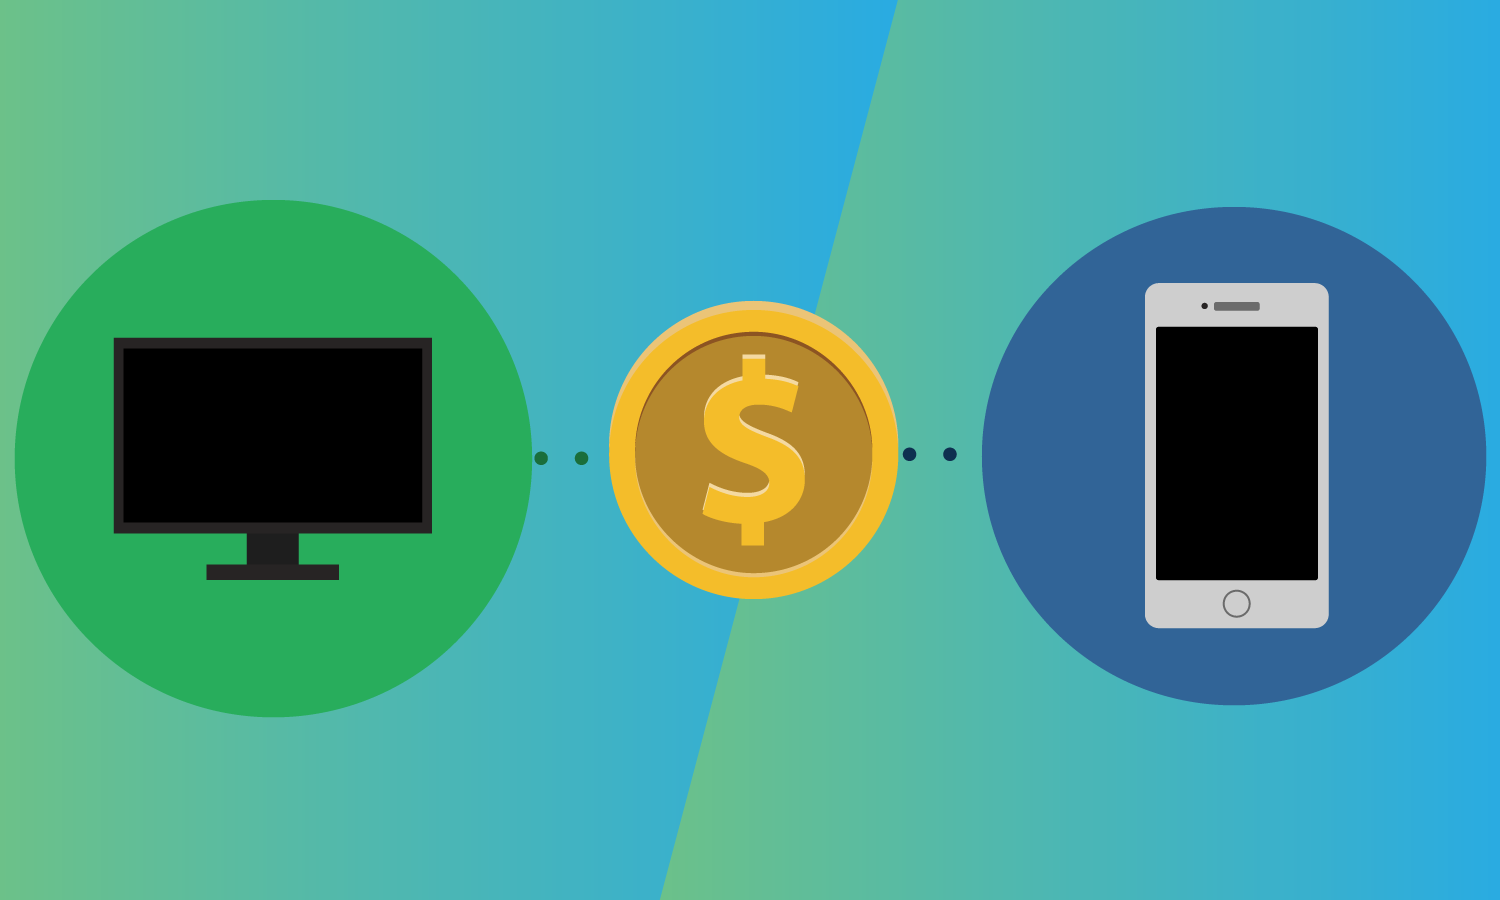 Differences between mCommerce and eCommerce